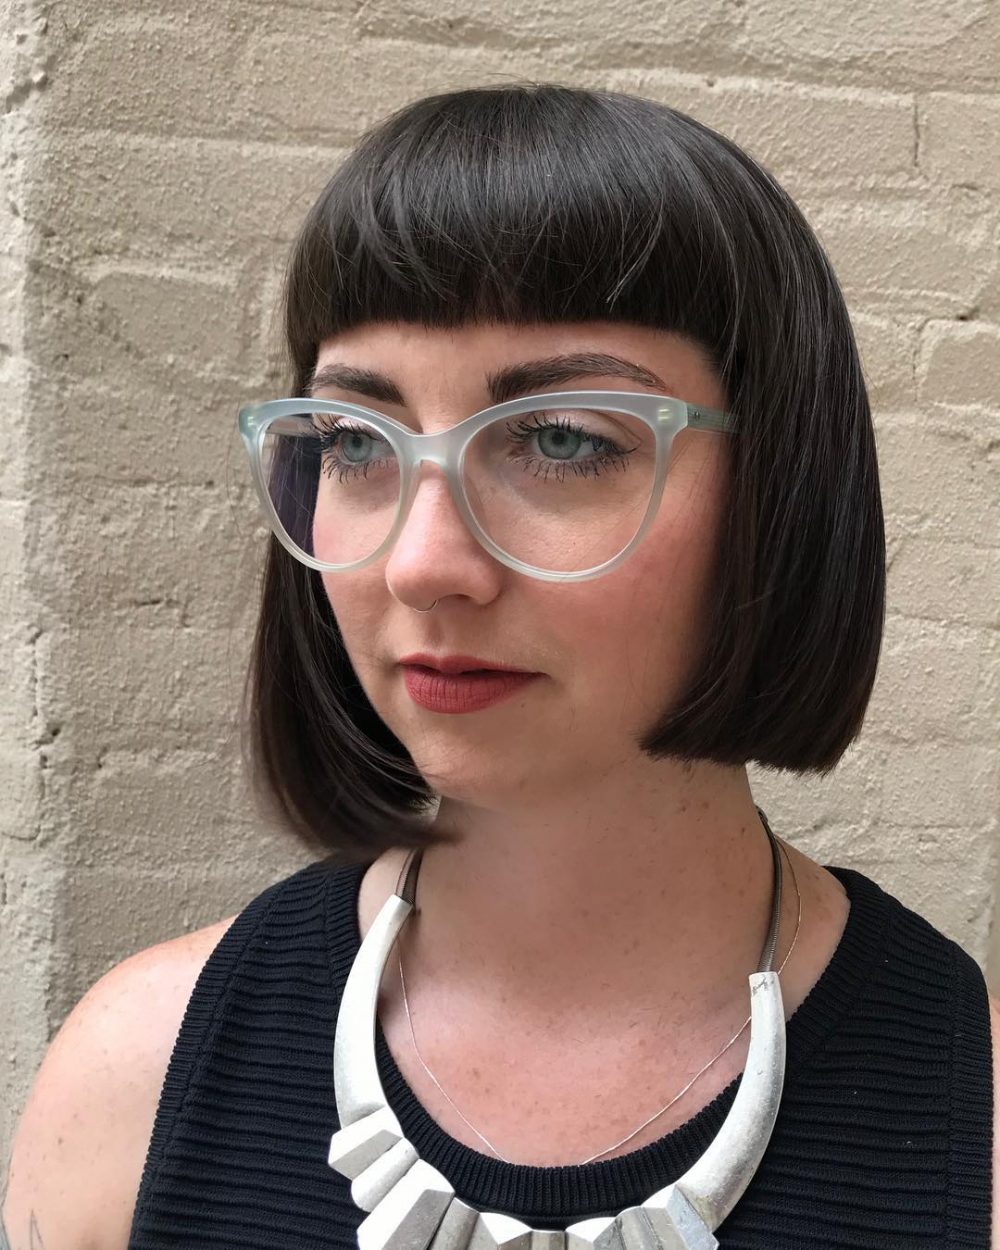 Black medium-length hair perfect with glasses and bangs